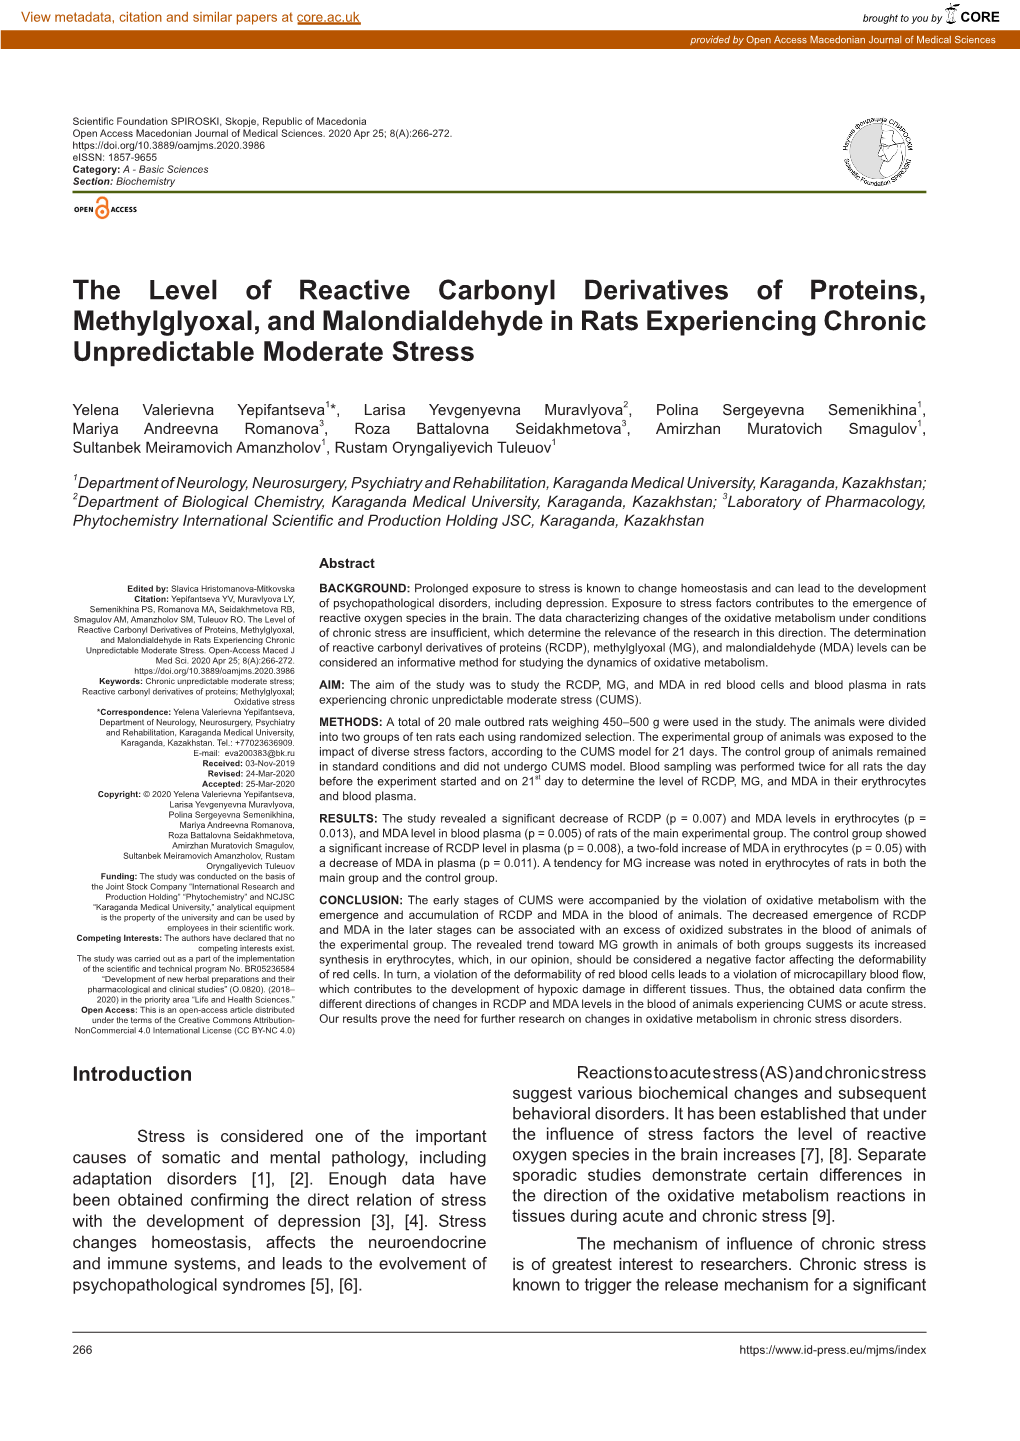 The Level of Reactive Carbonyl Derivatives of Proteins, Methylglyoxal, and Malondialdehyde in Rats Experiencing Chronic Unpredictable Moderate Stress